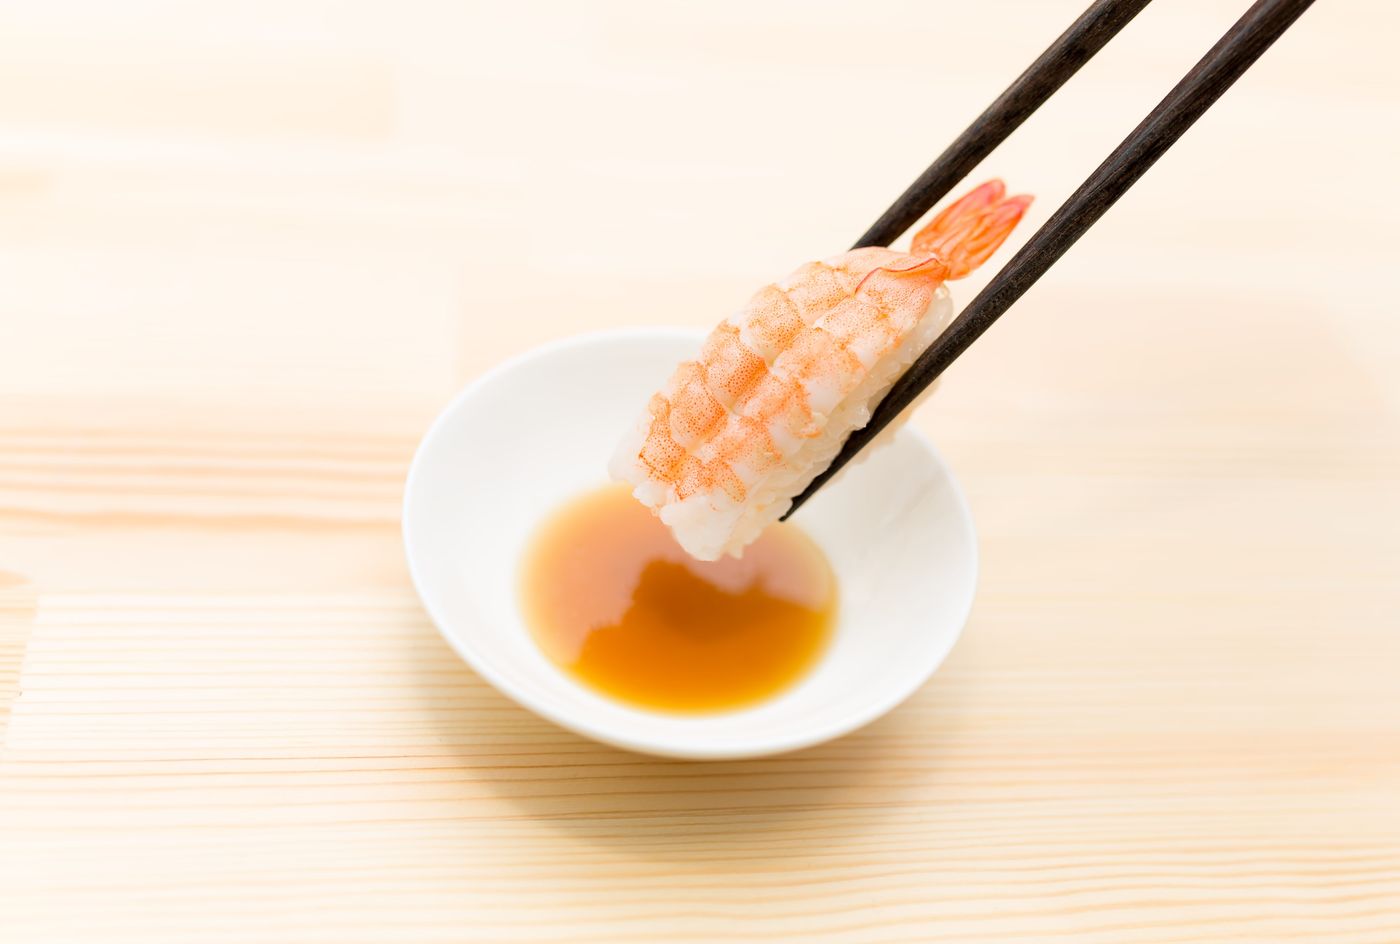 Should you add wasabi to your soy sauce at a sushi restaurant? - Japan Today